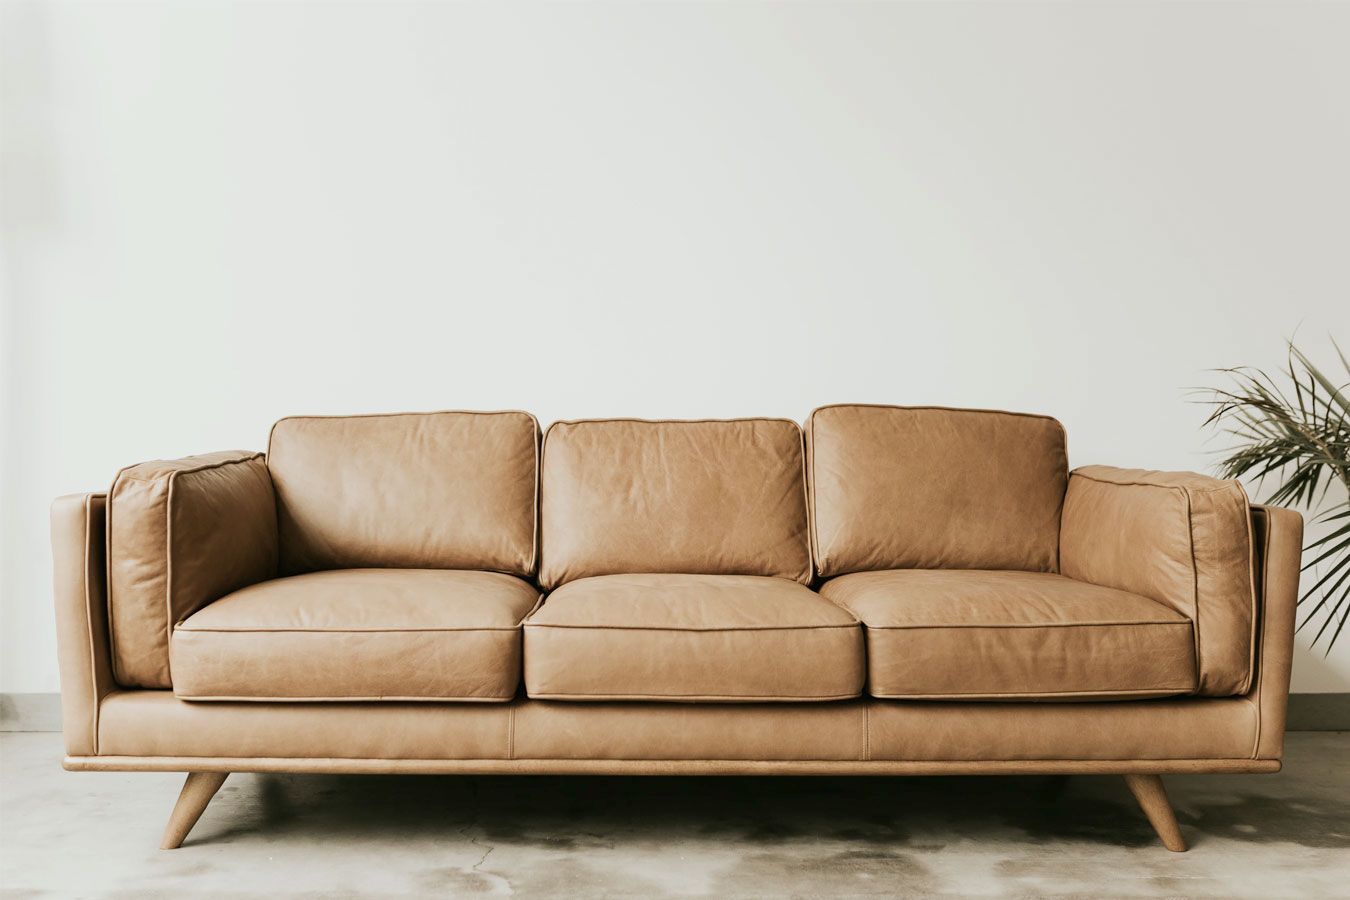 10 Places To Buy A Mid Century Modern Sofa Online Intended For Mid Century Modern Sofas (View 19 of 20)